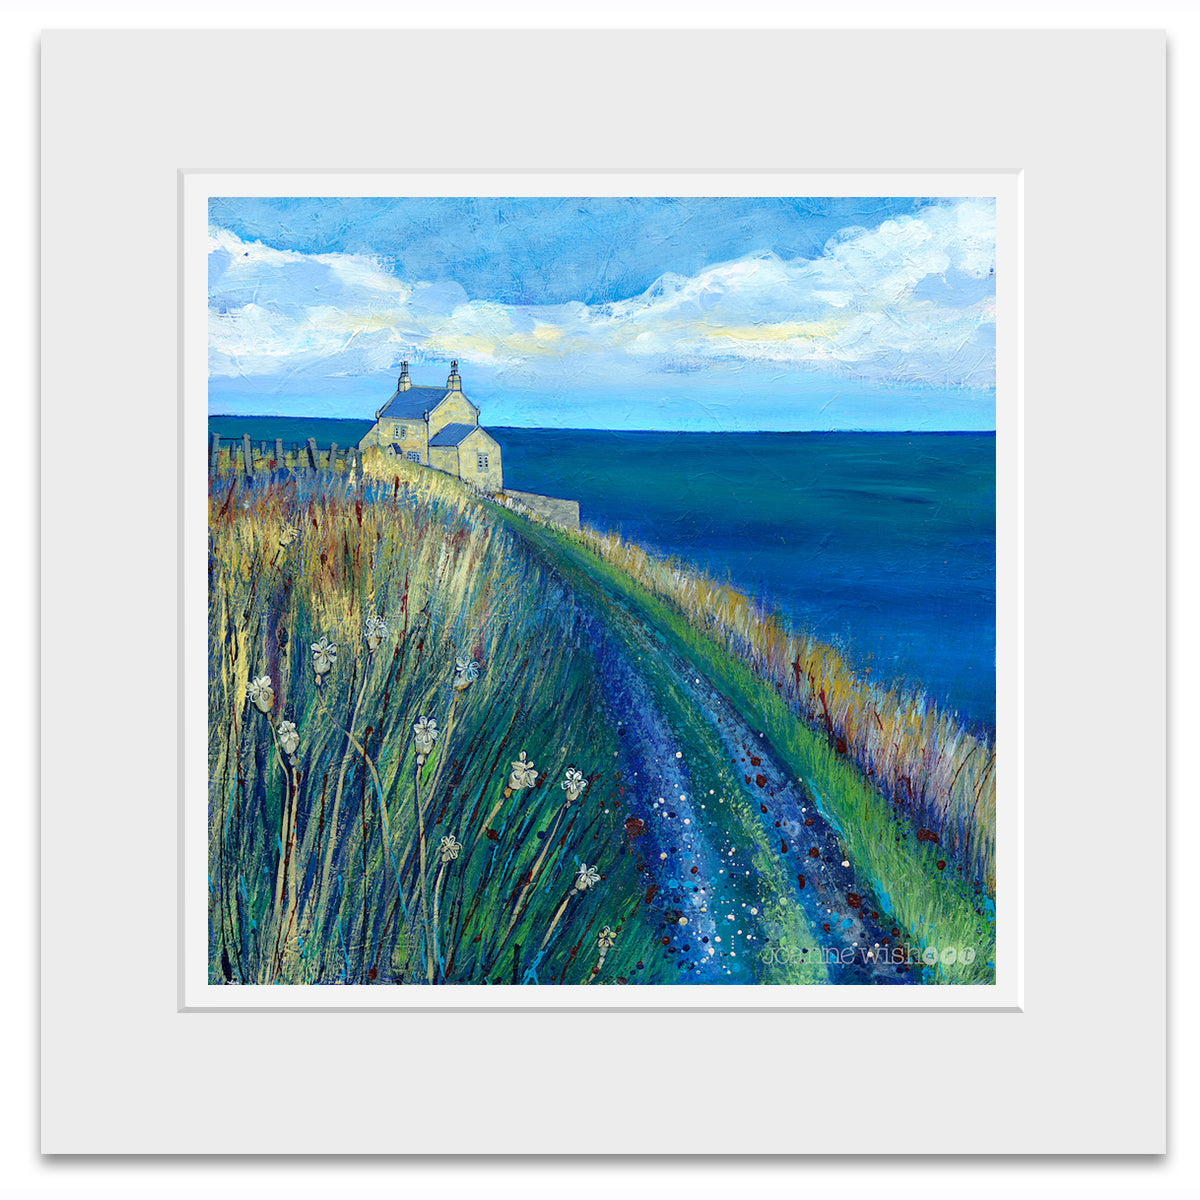 A mounted print of the Bathing house on the northumberland coastal path.